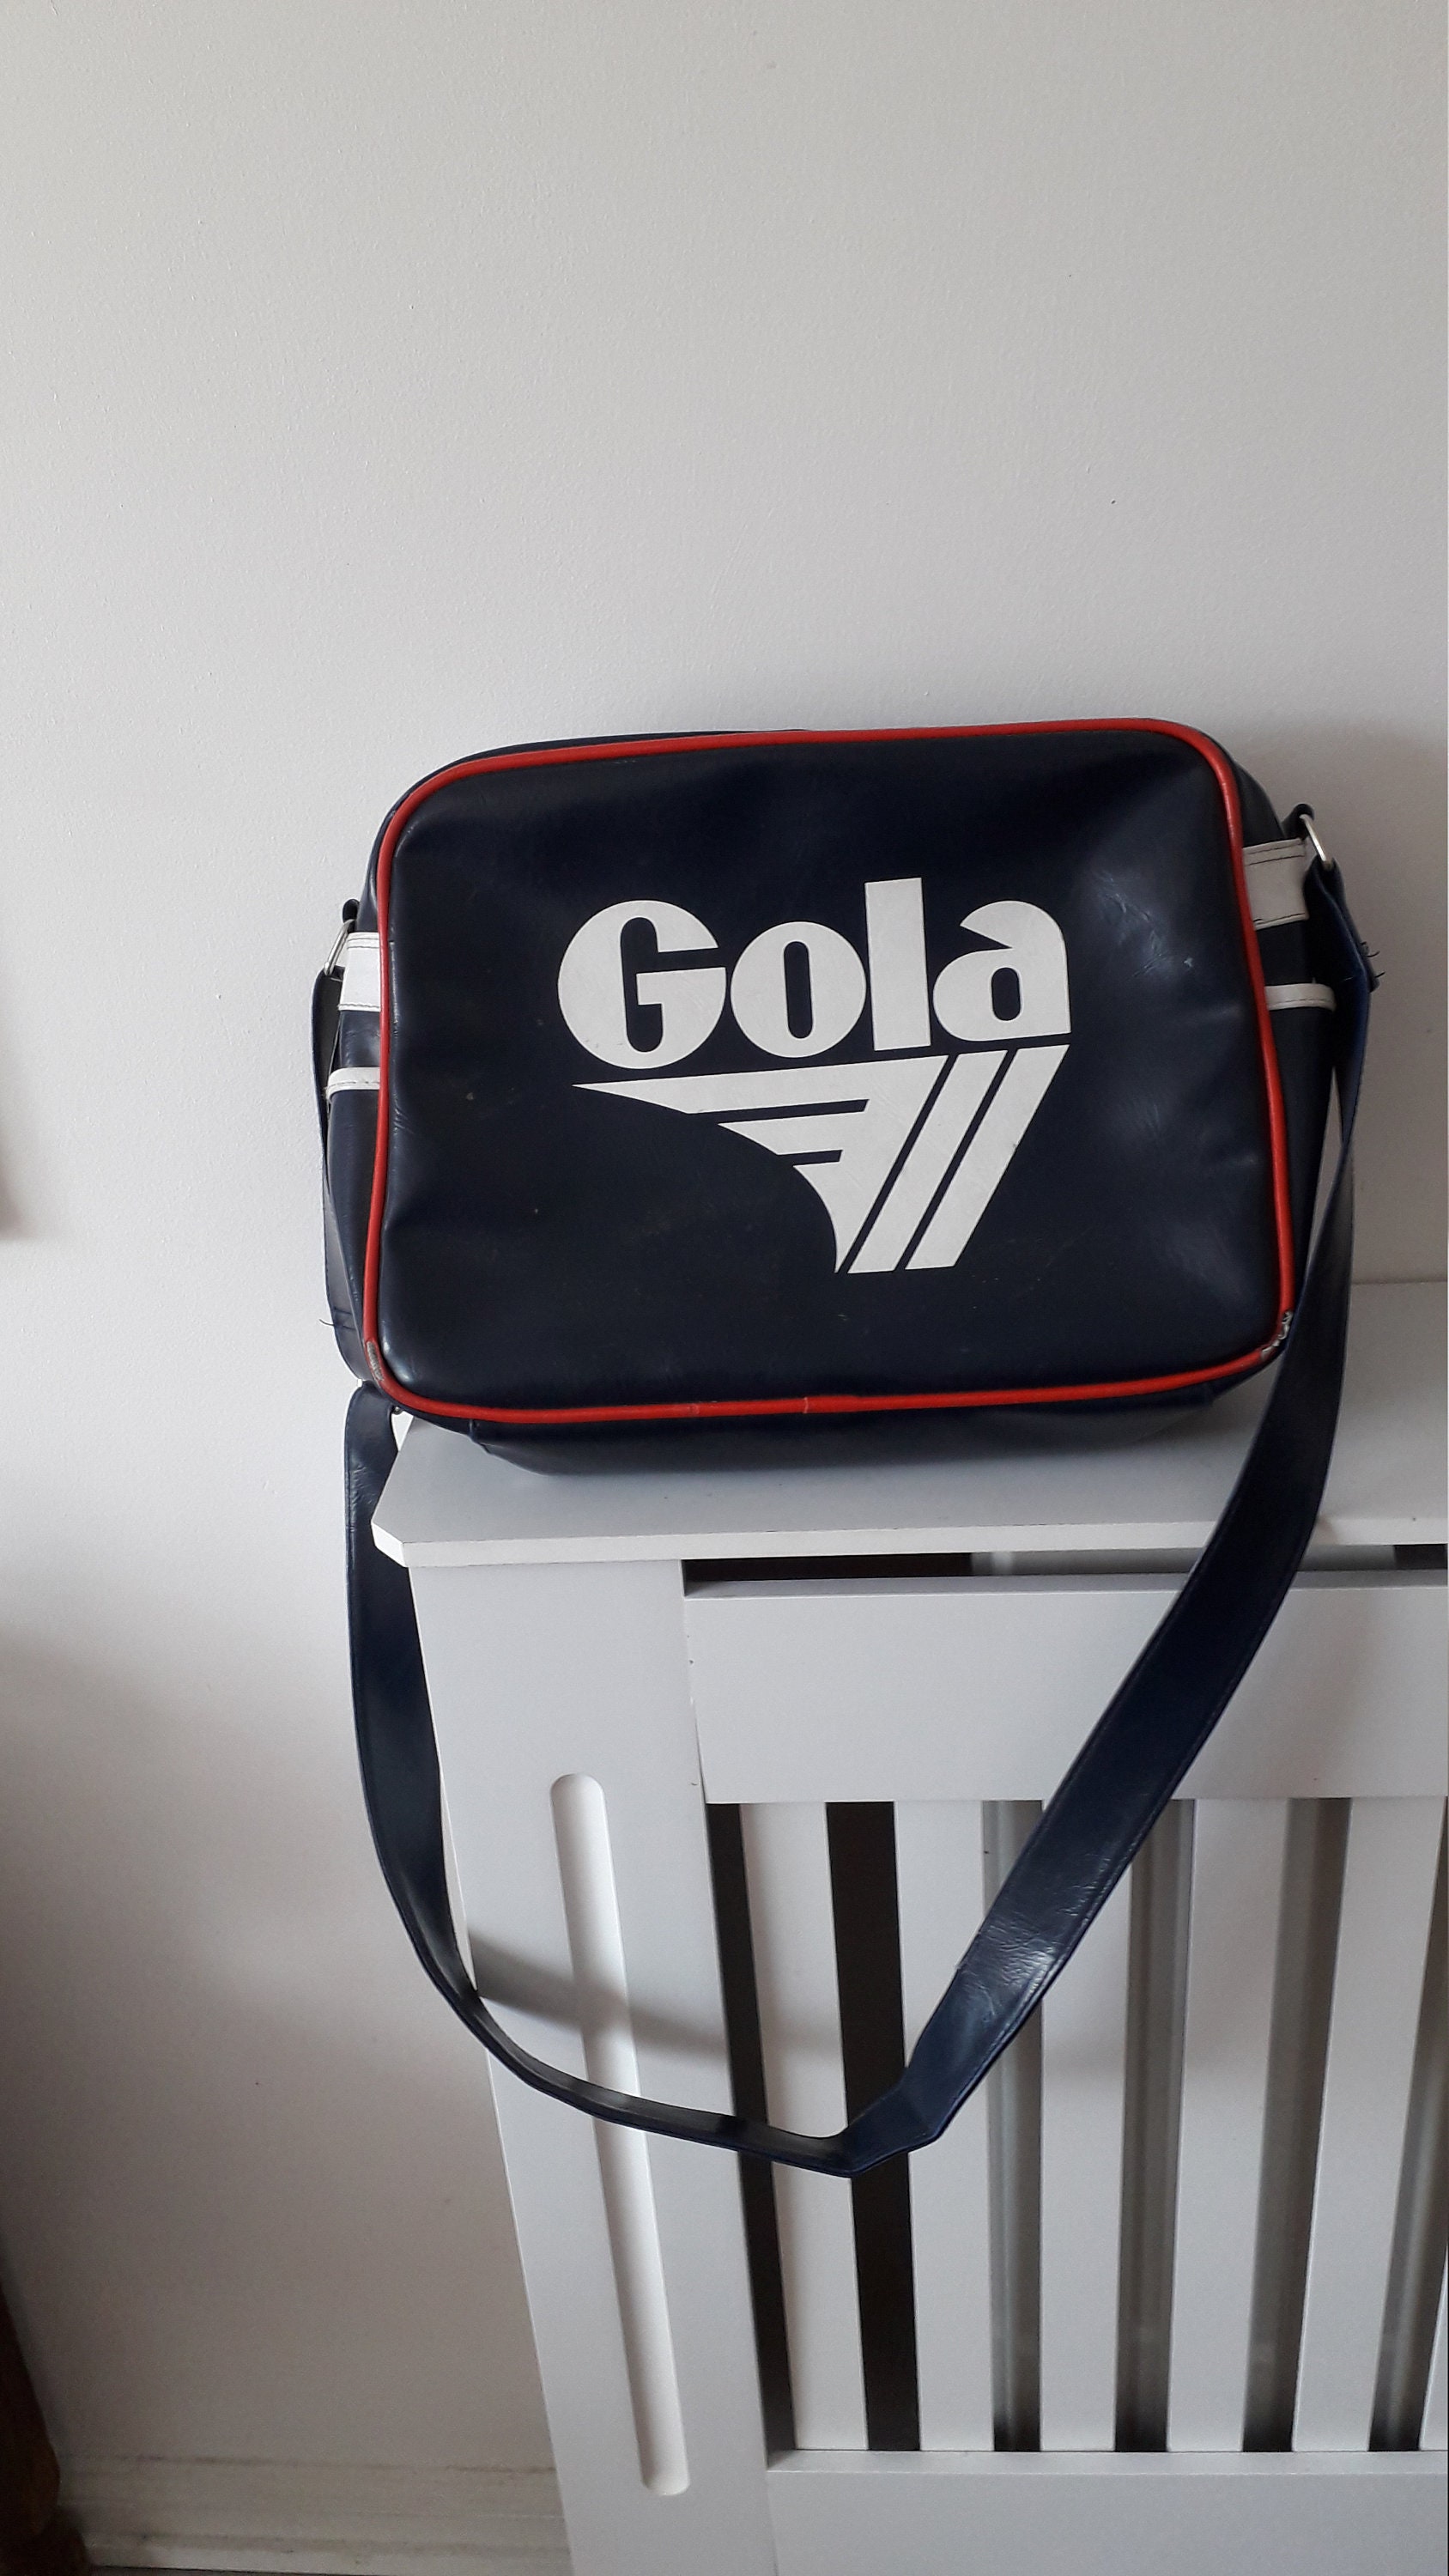 Buy Gola Redford Classic messenger bags in navy/white online at gola